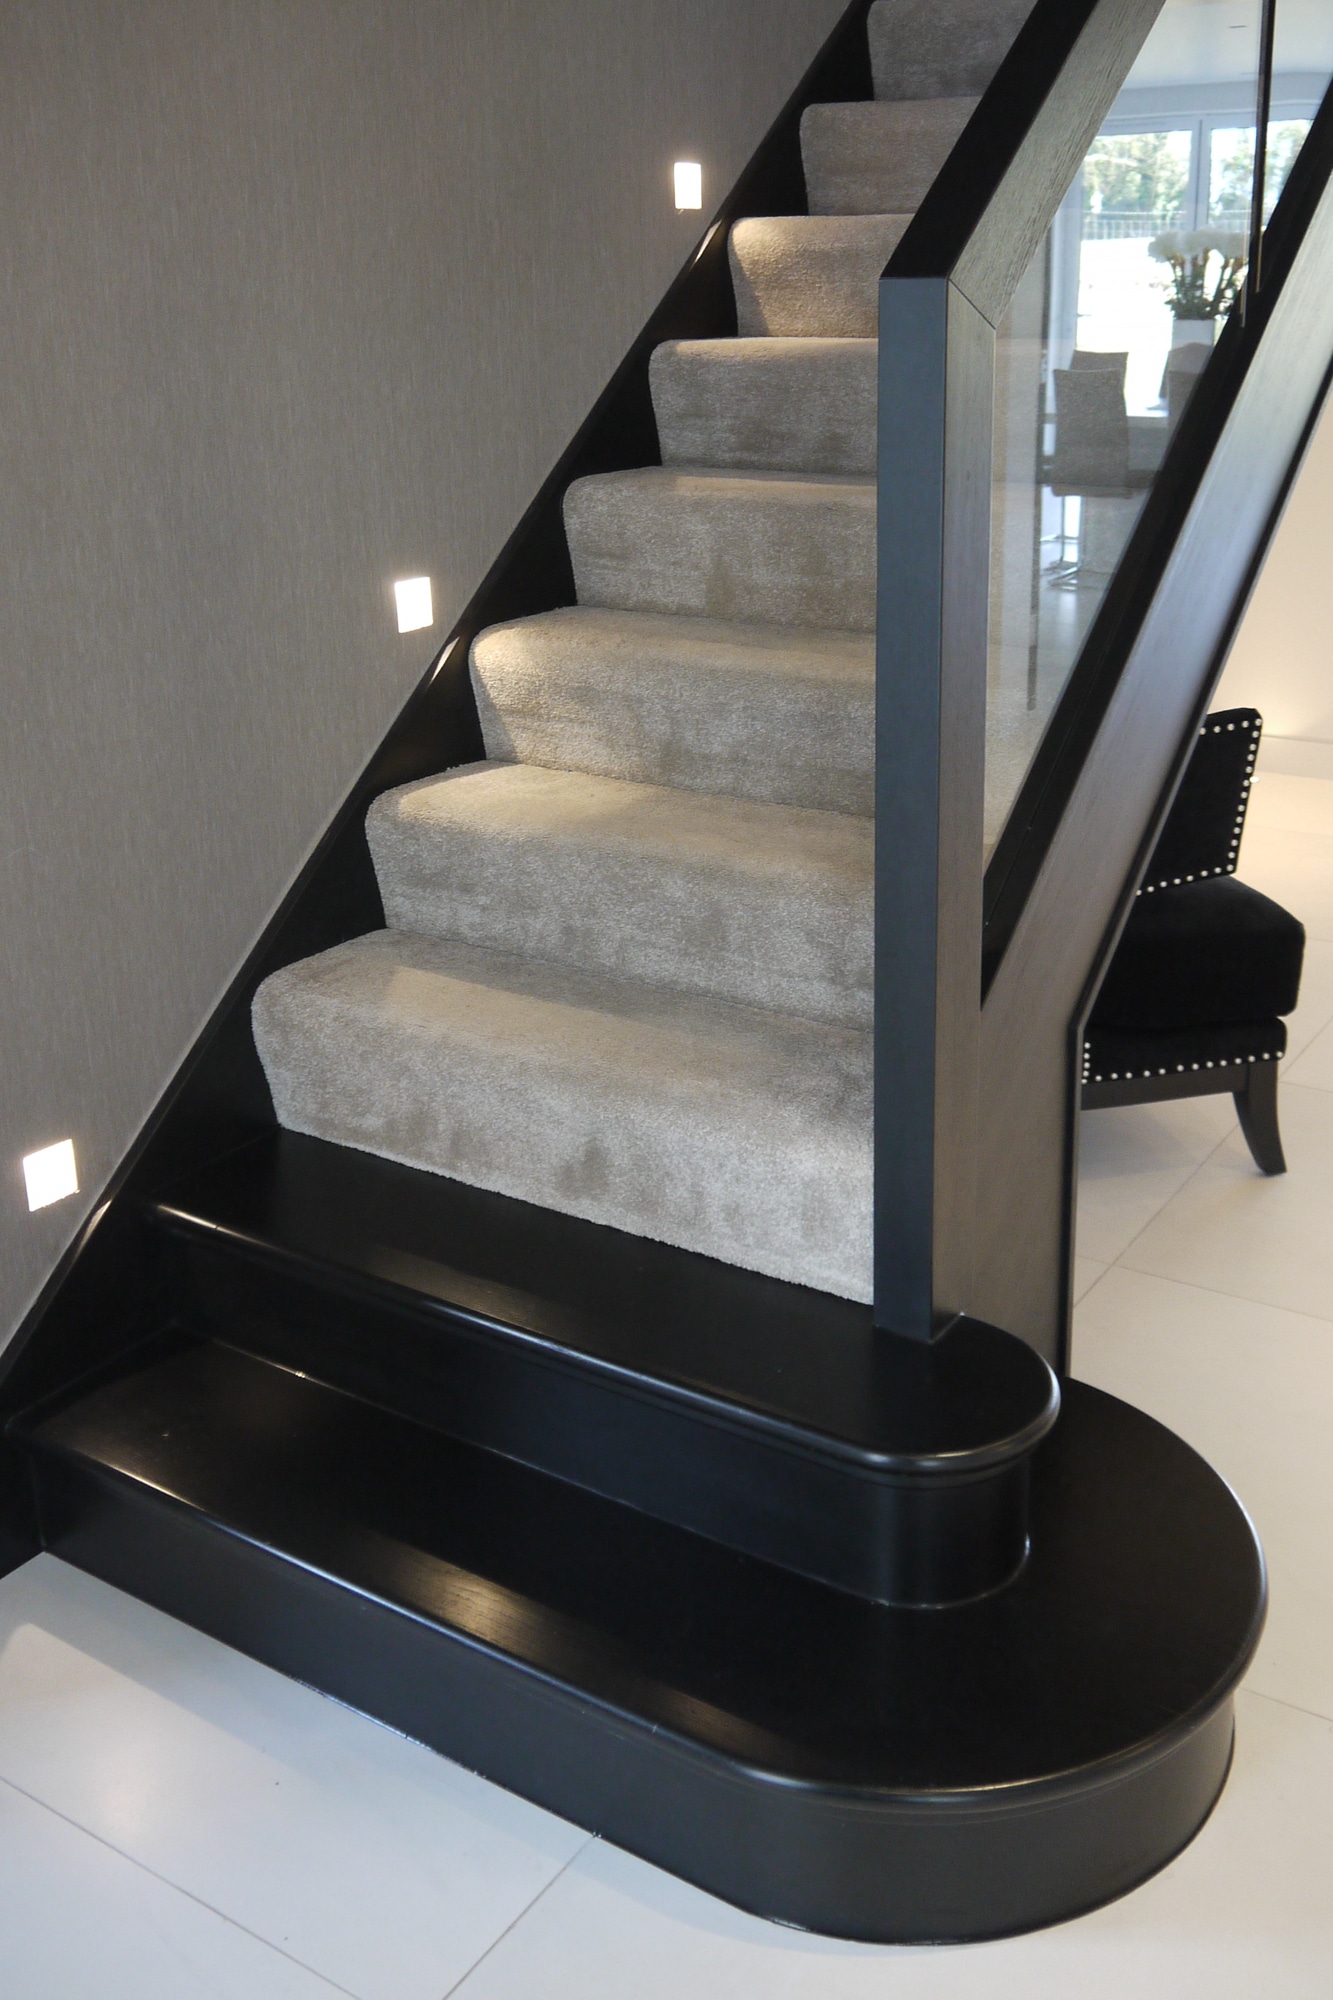 Bespoke closed string staircase in Elstree Hertfordshire